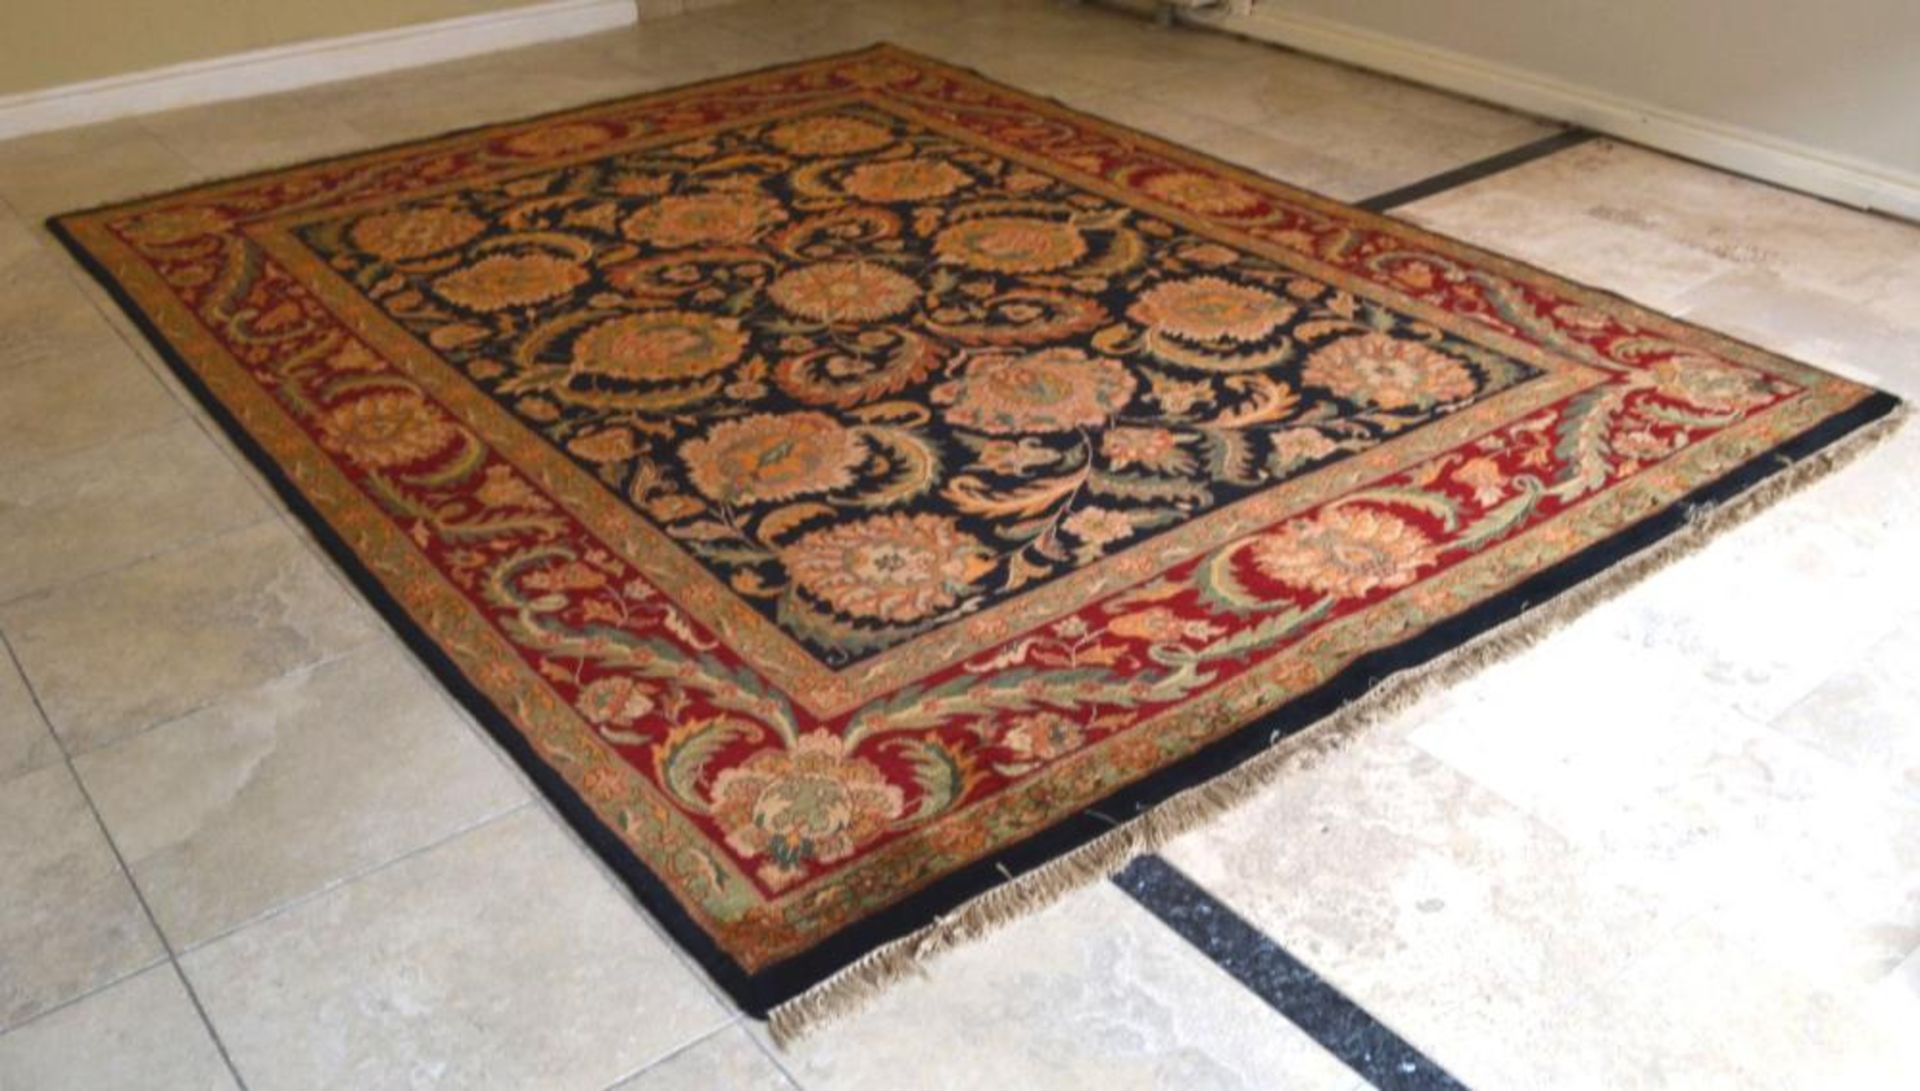 1 x Red and Black Jaipur Handknotted Carpet - Handwoven In Jaipur With Handspun Wool And Vegetable - Image 16 of 16